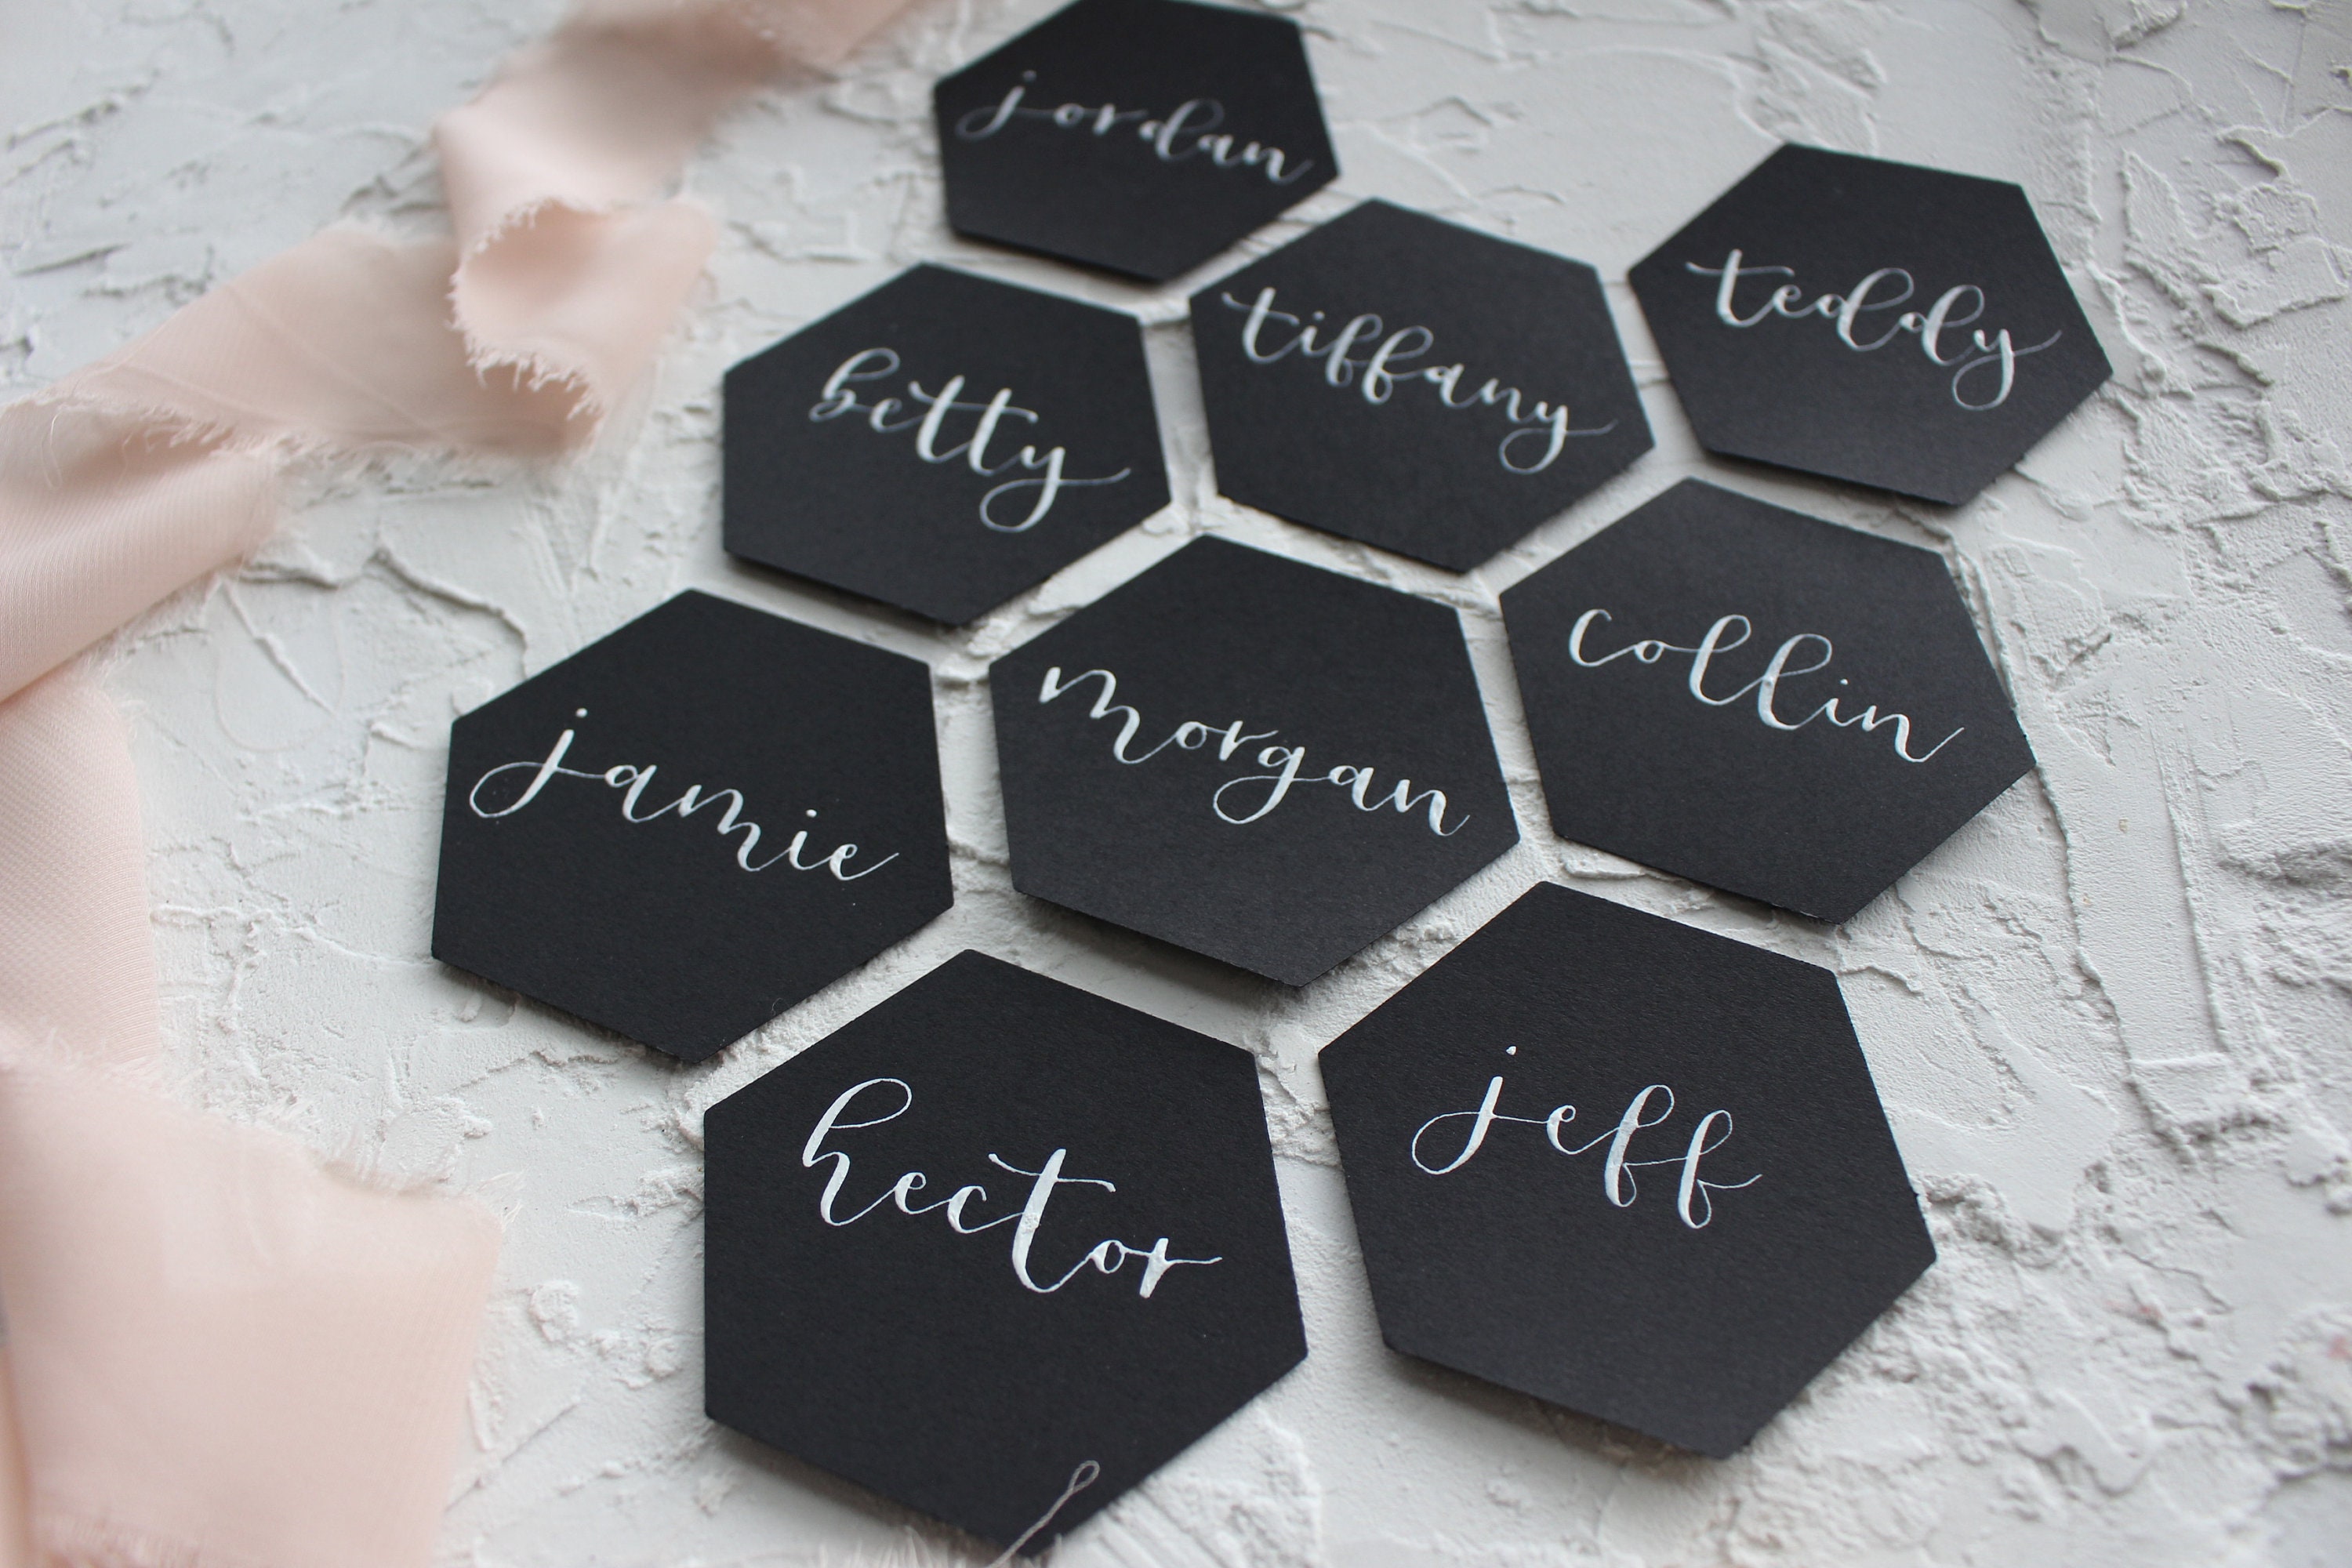 Black Hexagon Name Cards Wedding Calligraphy Place Cards | Etsy